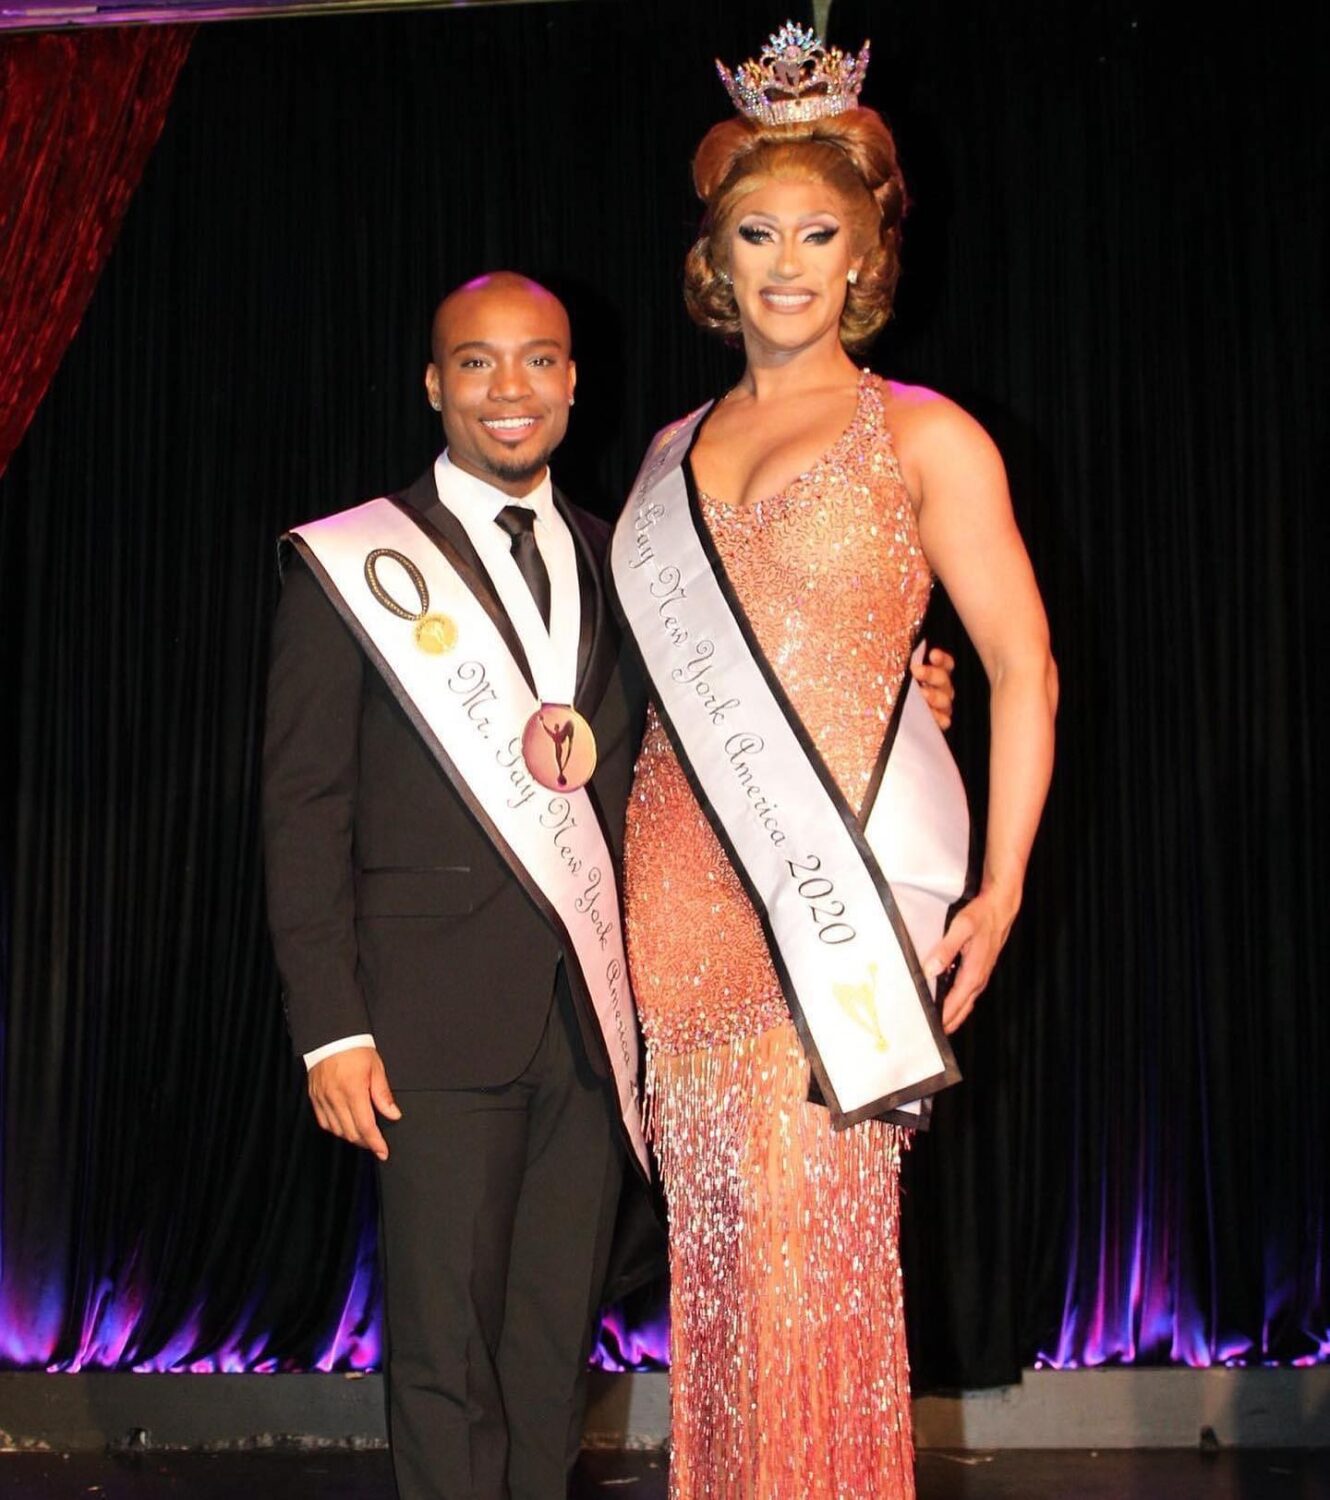 Geo Glam and Brenda Dharling at Mr. and Miss Gay New York America | Cutting Room (New York, New York) | 3/10/2020